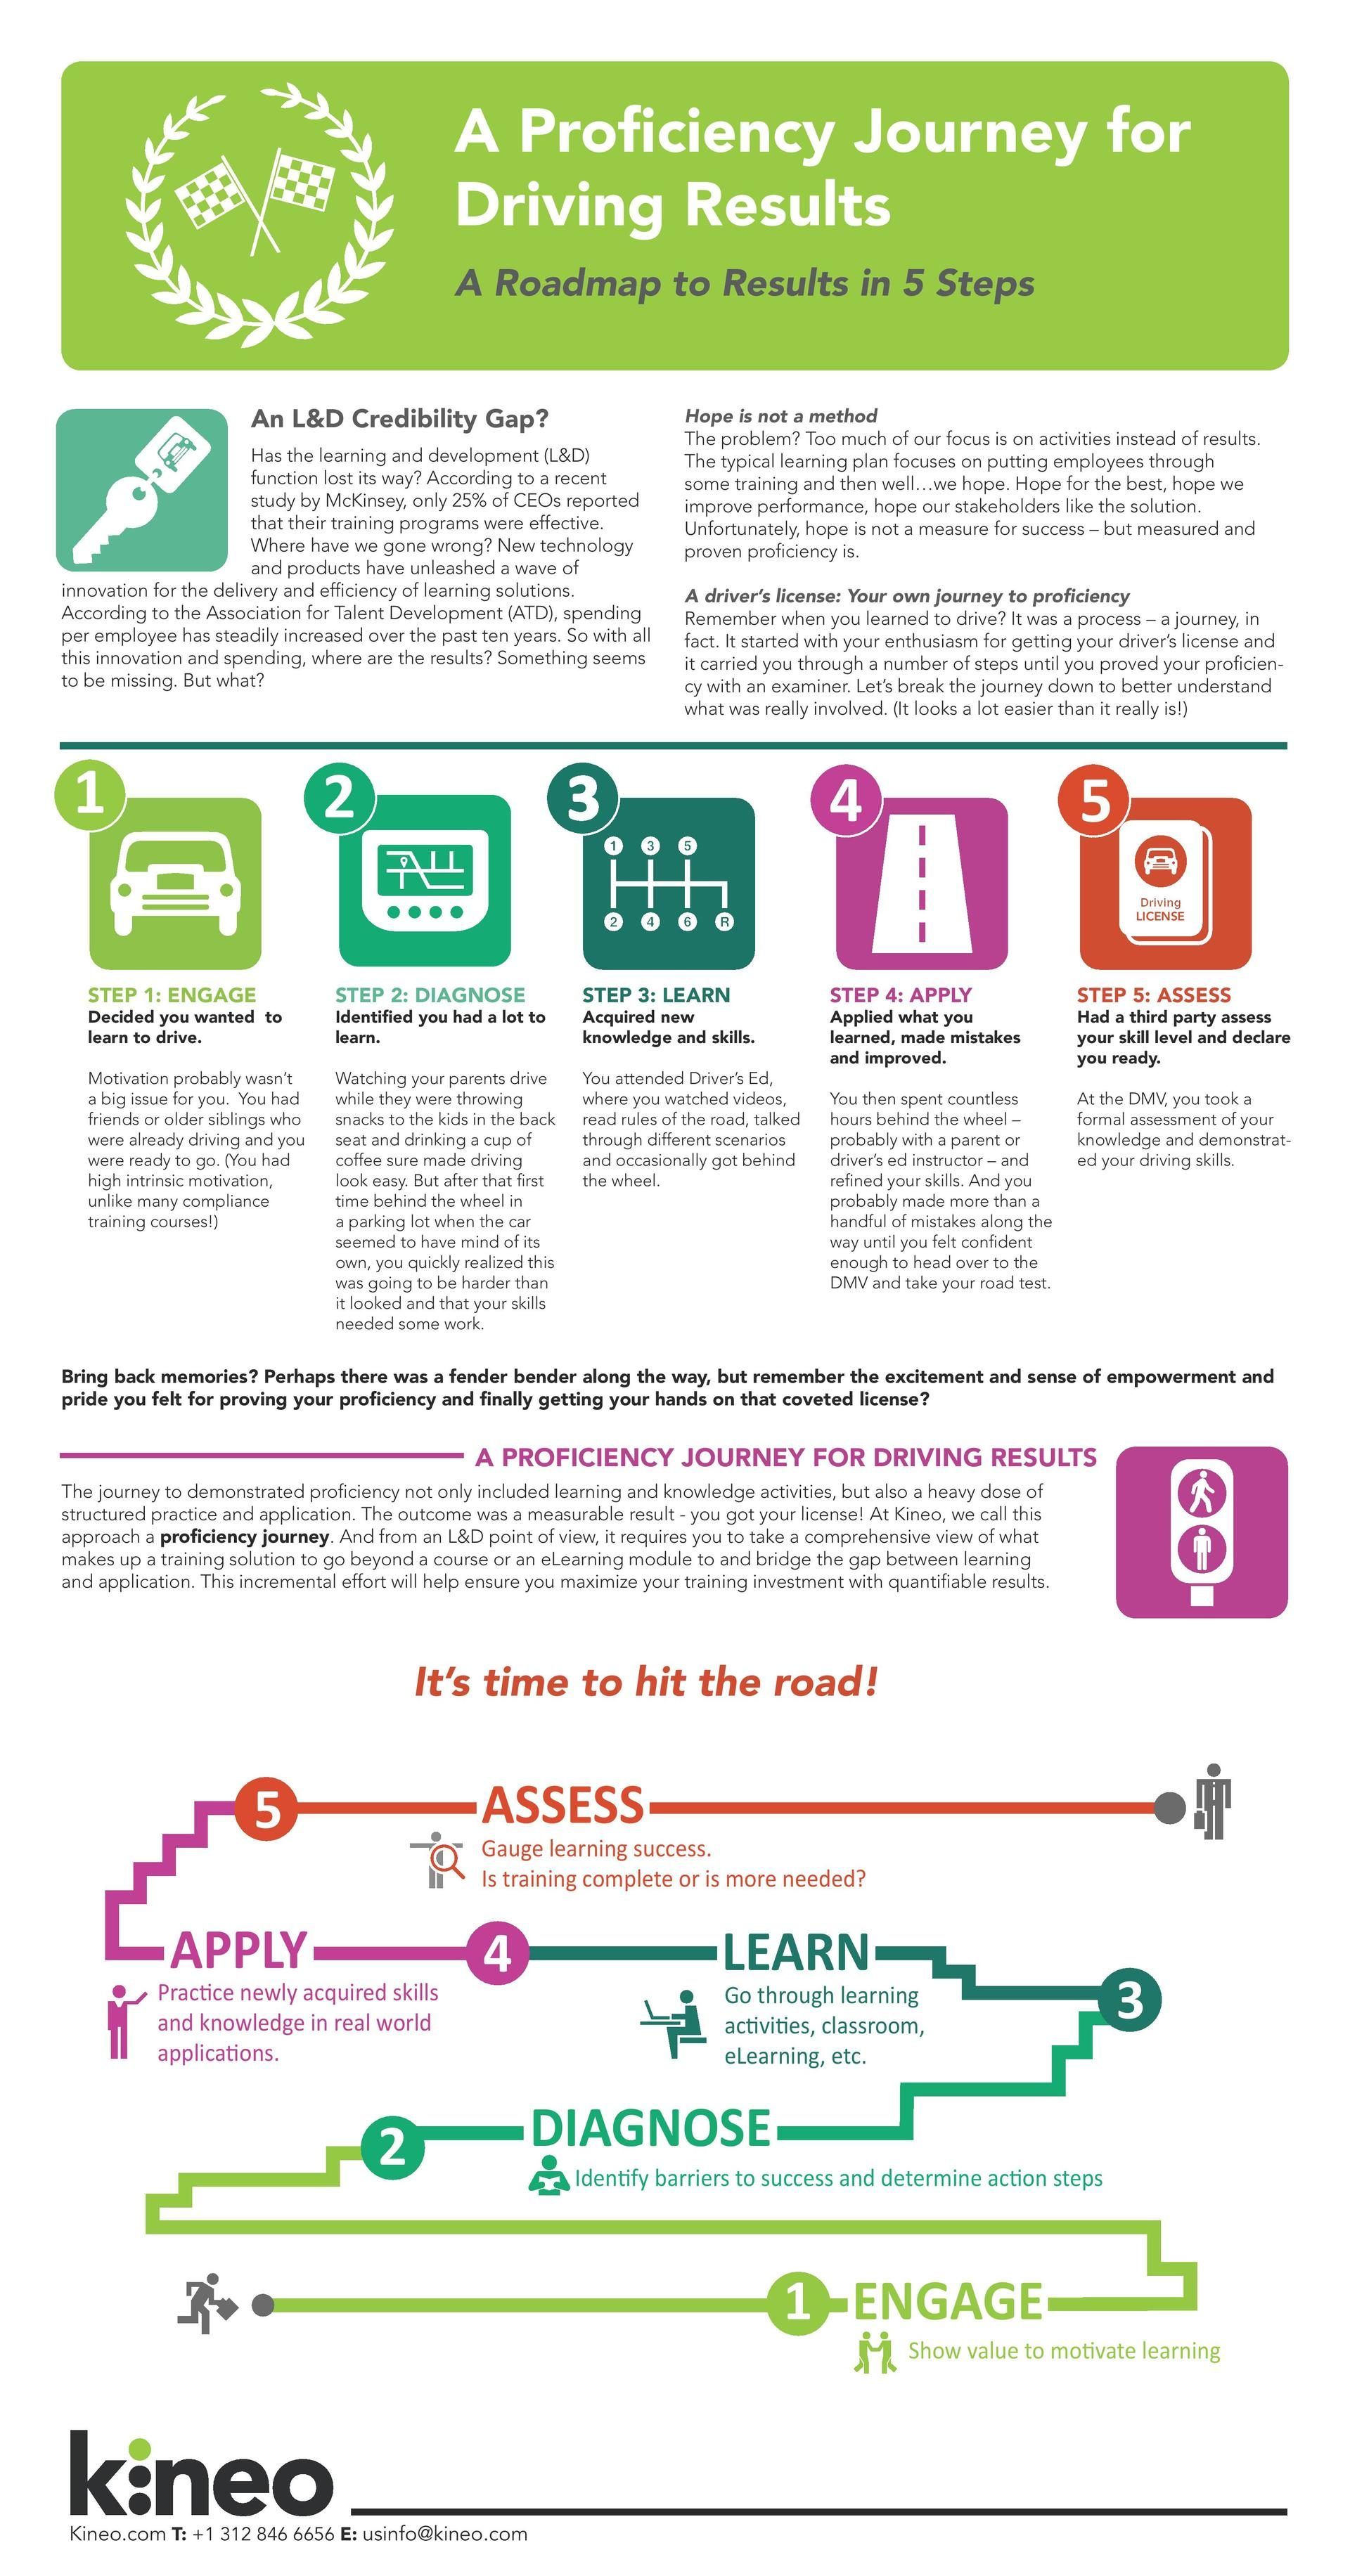 A Proficiency Journey for Driving Results Infographic